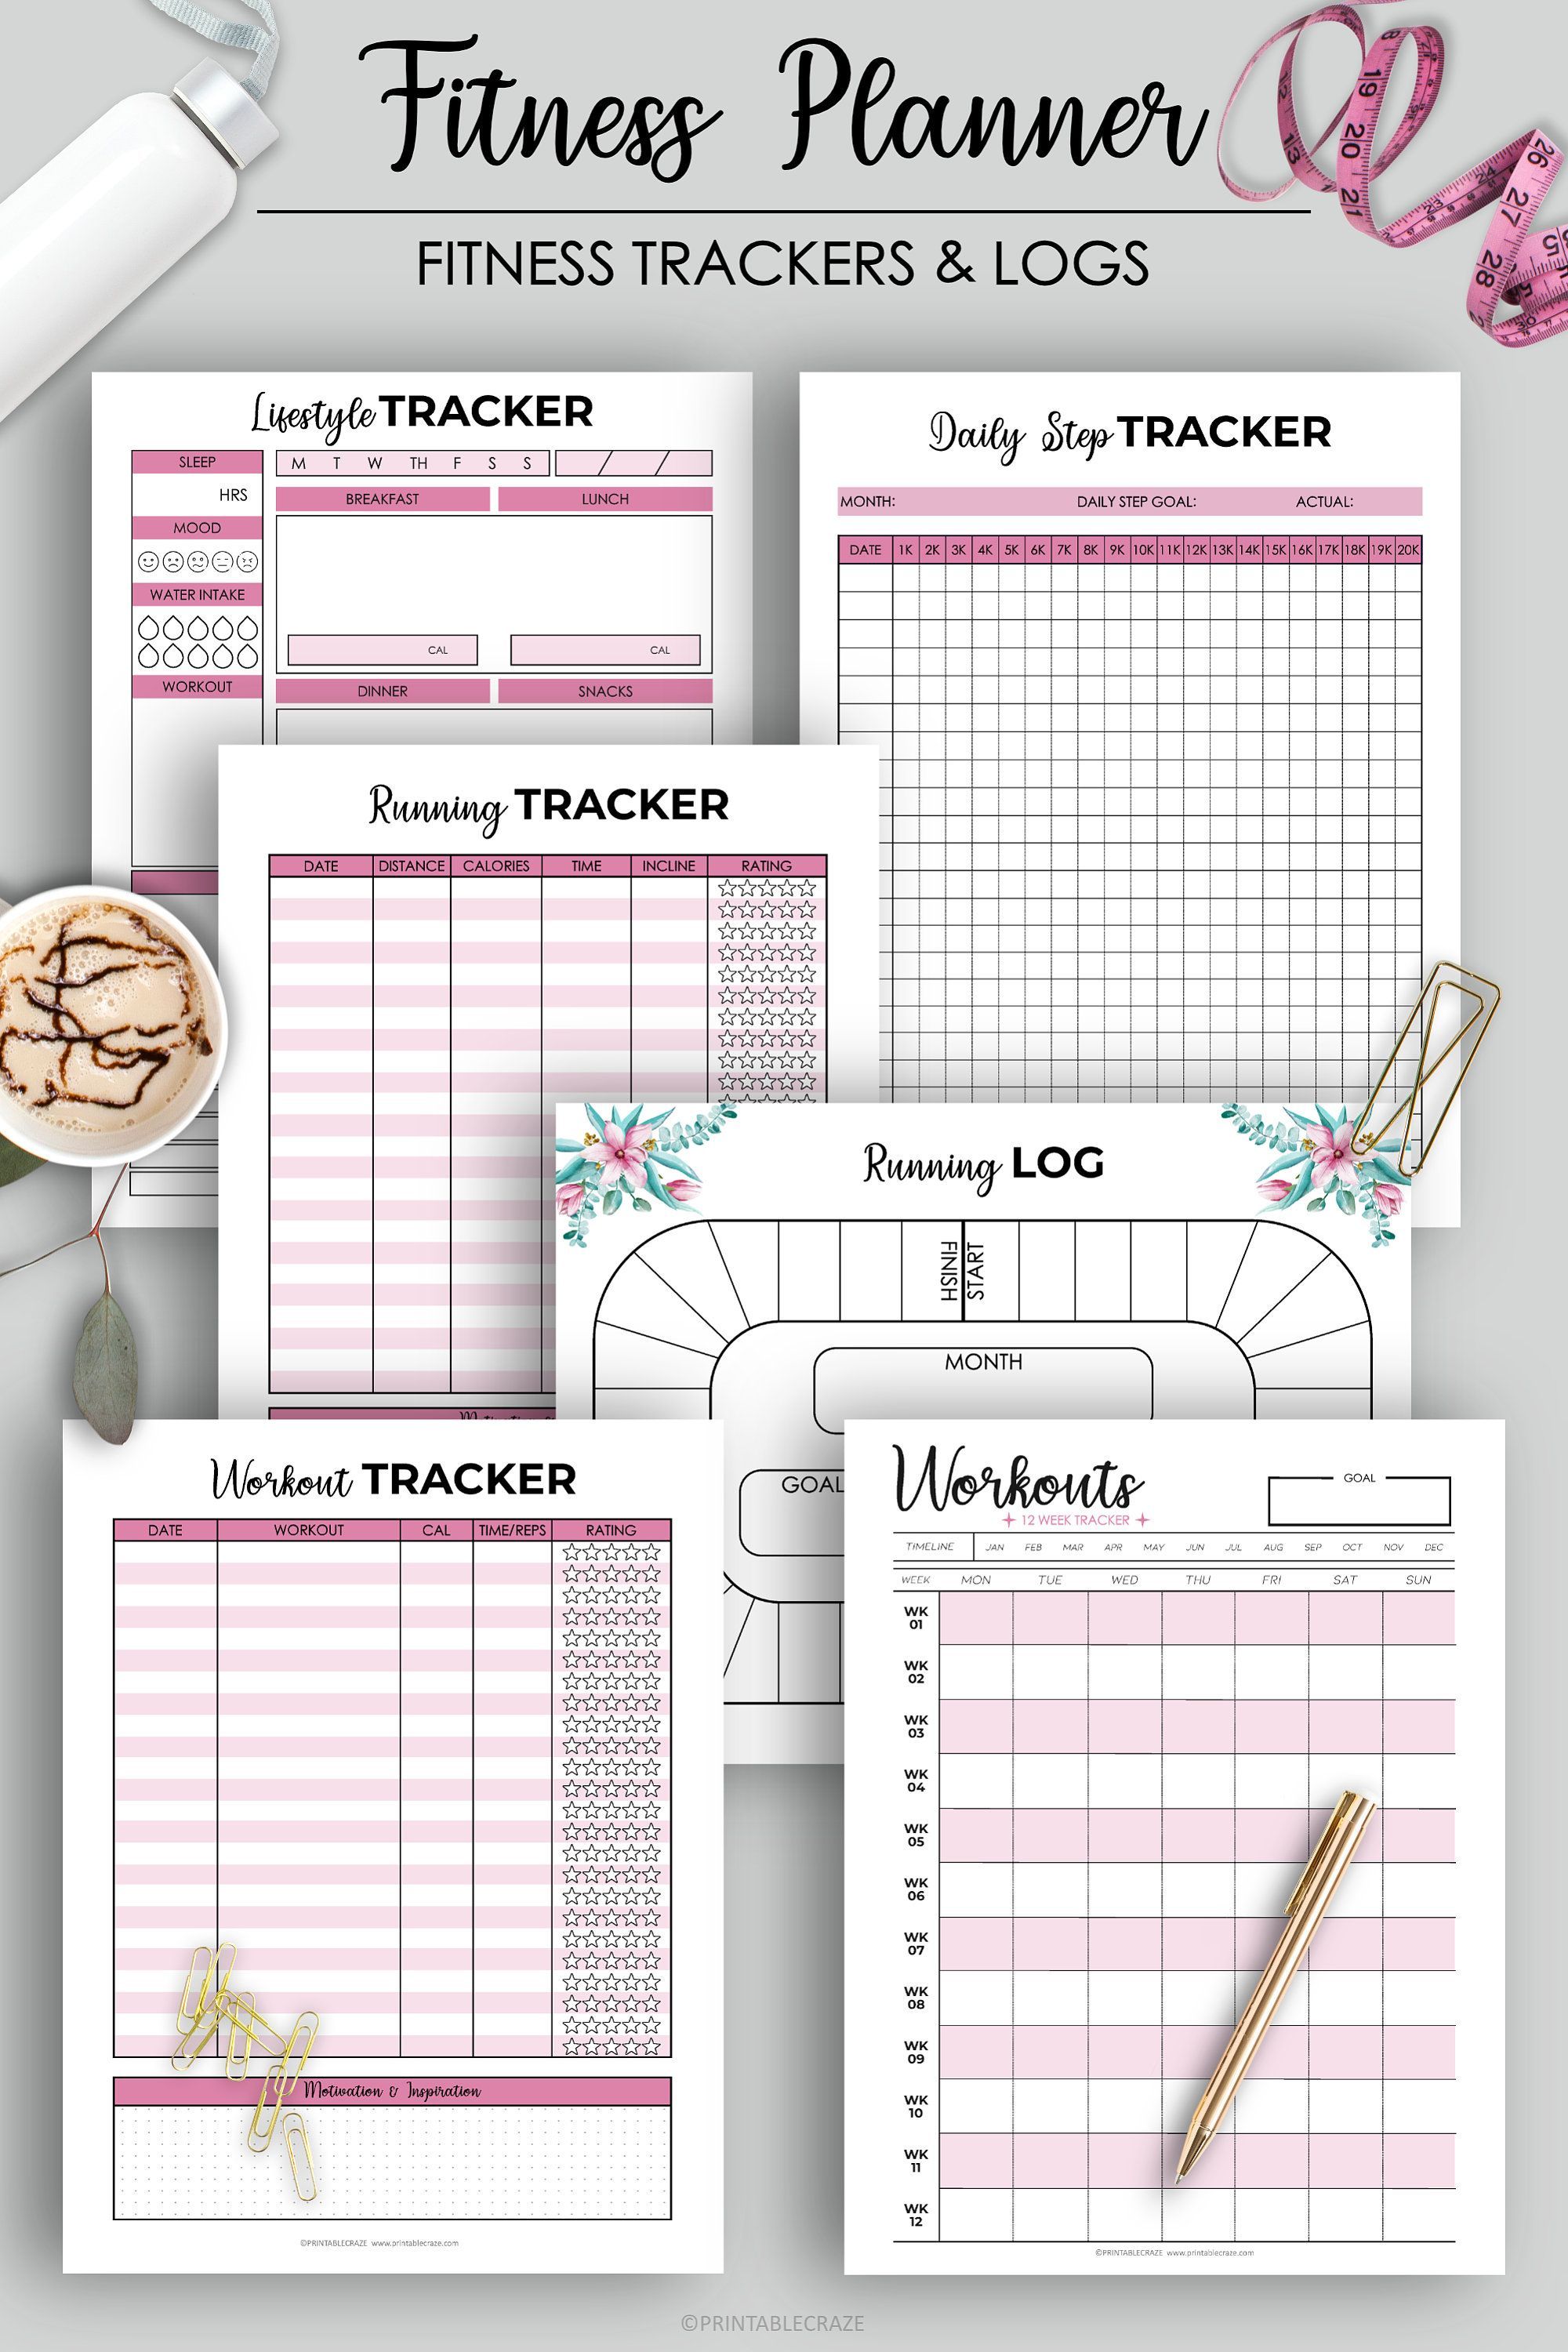 Fitness Planner Printable Weight Loss Health Planner Fitness Journal Workout Log Food Diary Calorie Tracker Daily Weight Loss Step Tracker - Fitness Planner Printable Weight Loss Health Planner Fitness Journal Workout Log Food Diary Calorie Tracker Daily Weight Loss Step Tracker -   19 commit30 fitness Planner ideas